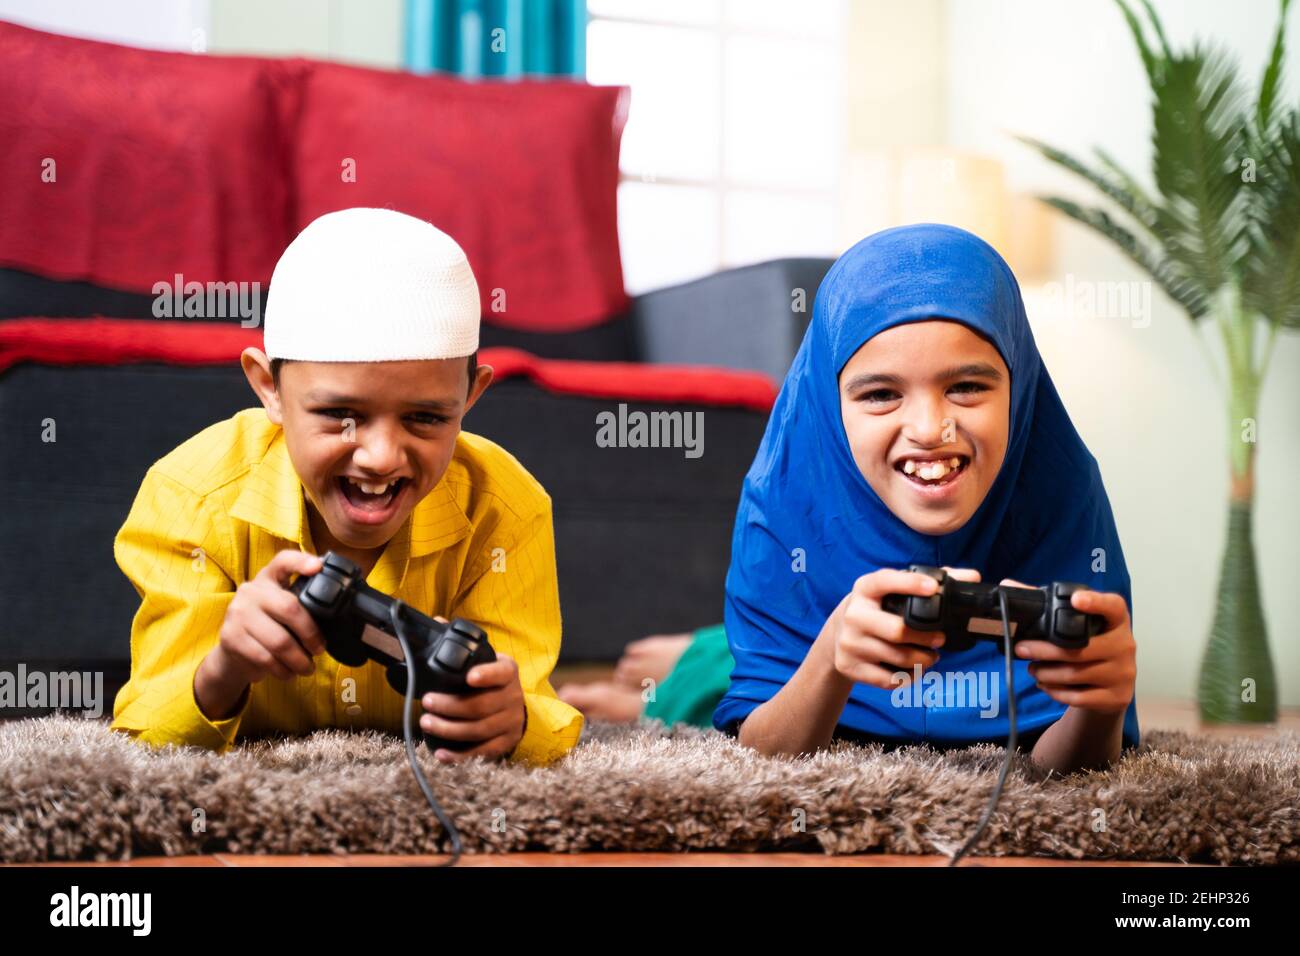 Two muslim sibling kids playing videogame using joystick while lying on floor at home - Concept of children unhealthy playing position and gaming Stock Photo